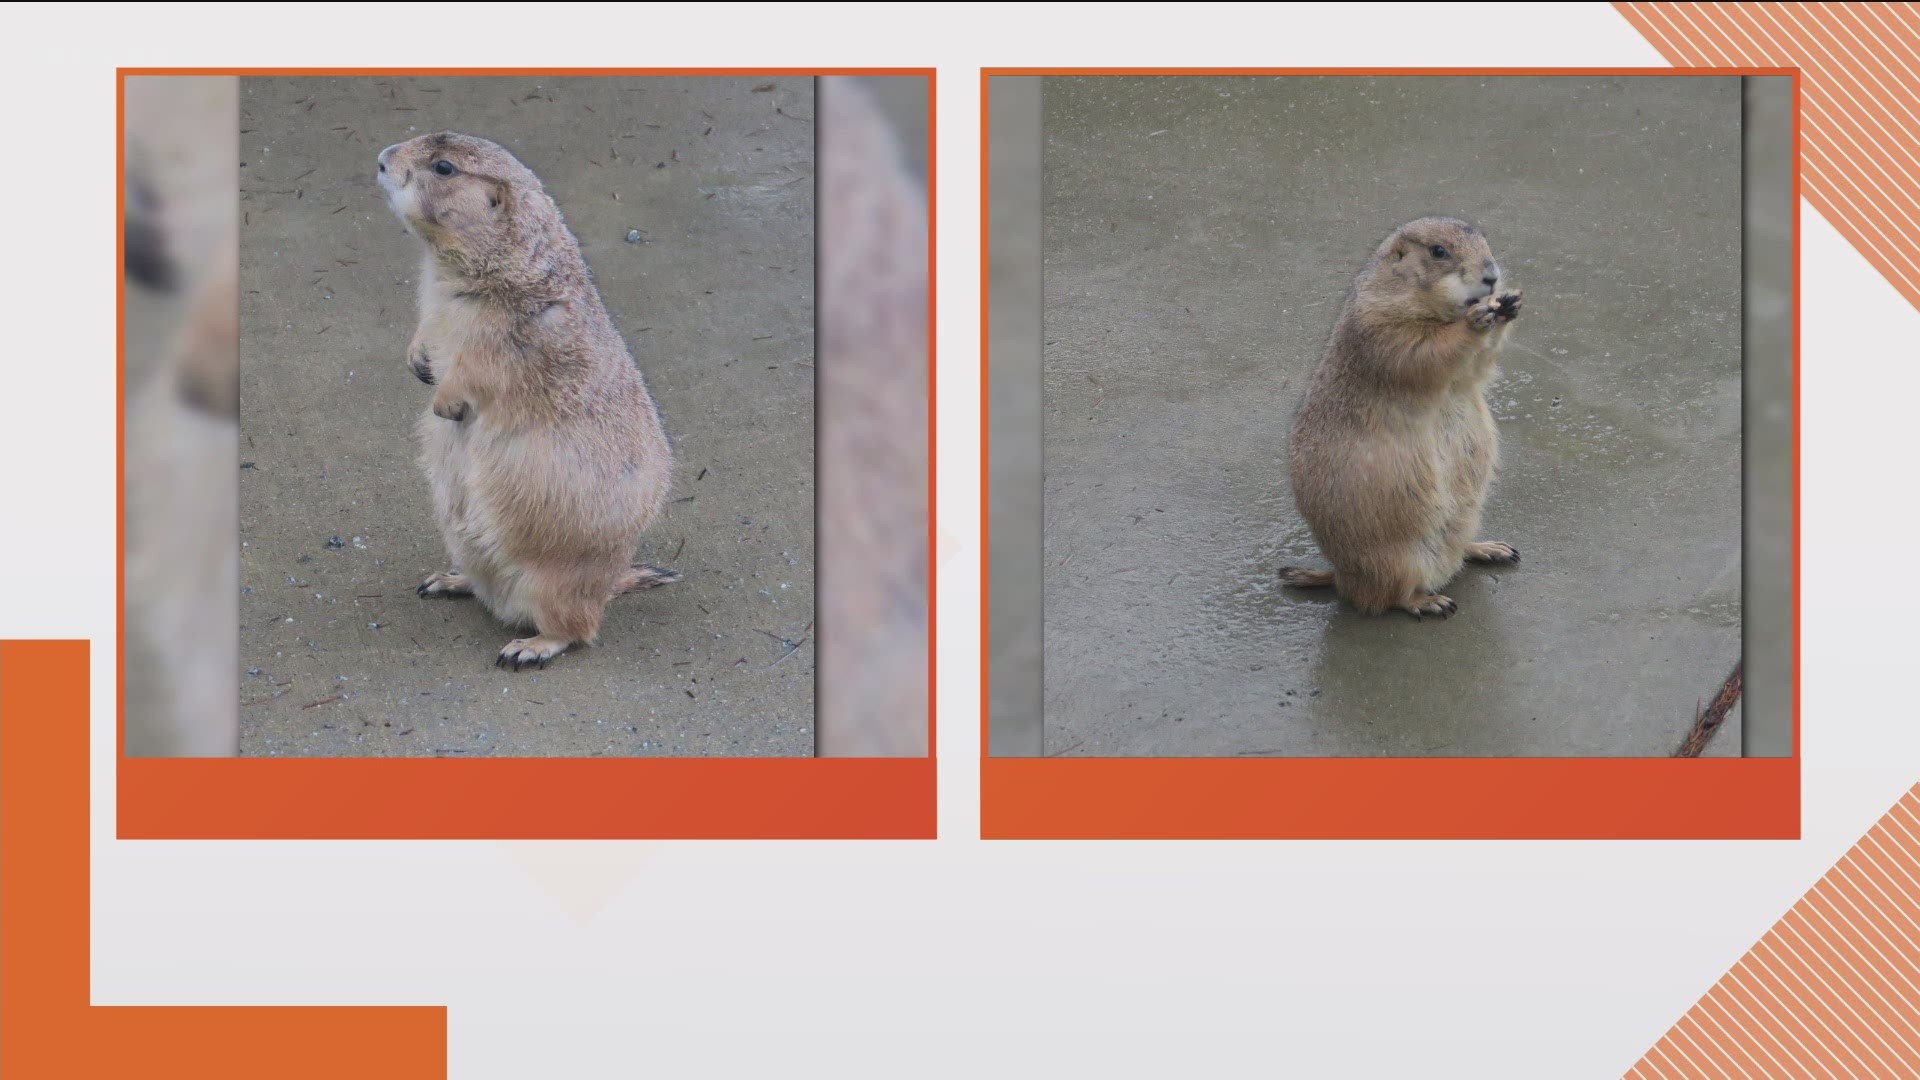 The Prairie dog's owner Tim Lutz says they predicted spring will come early this year.